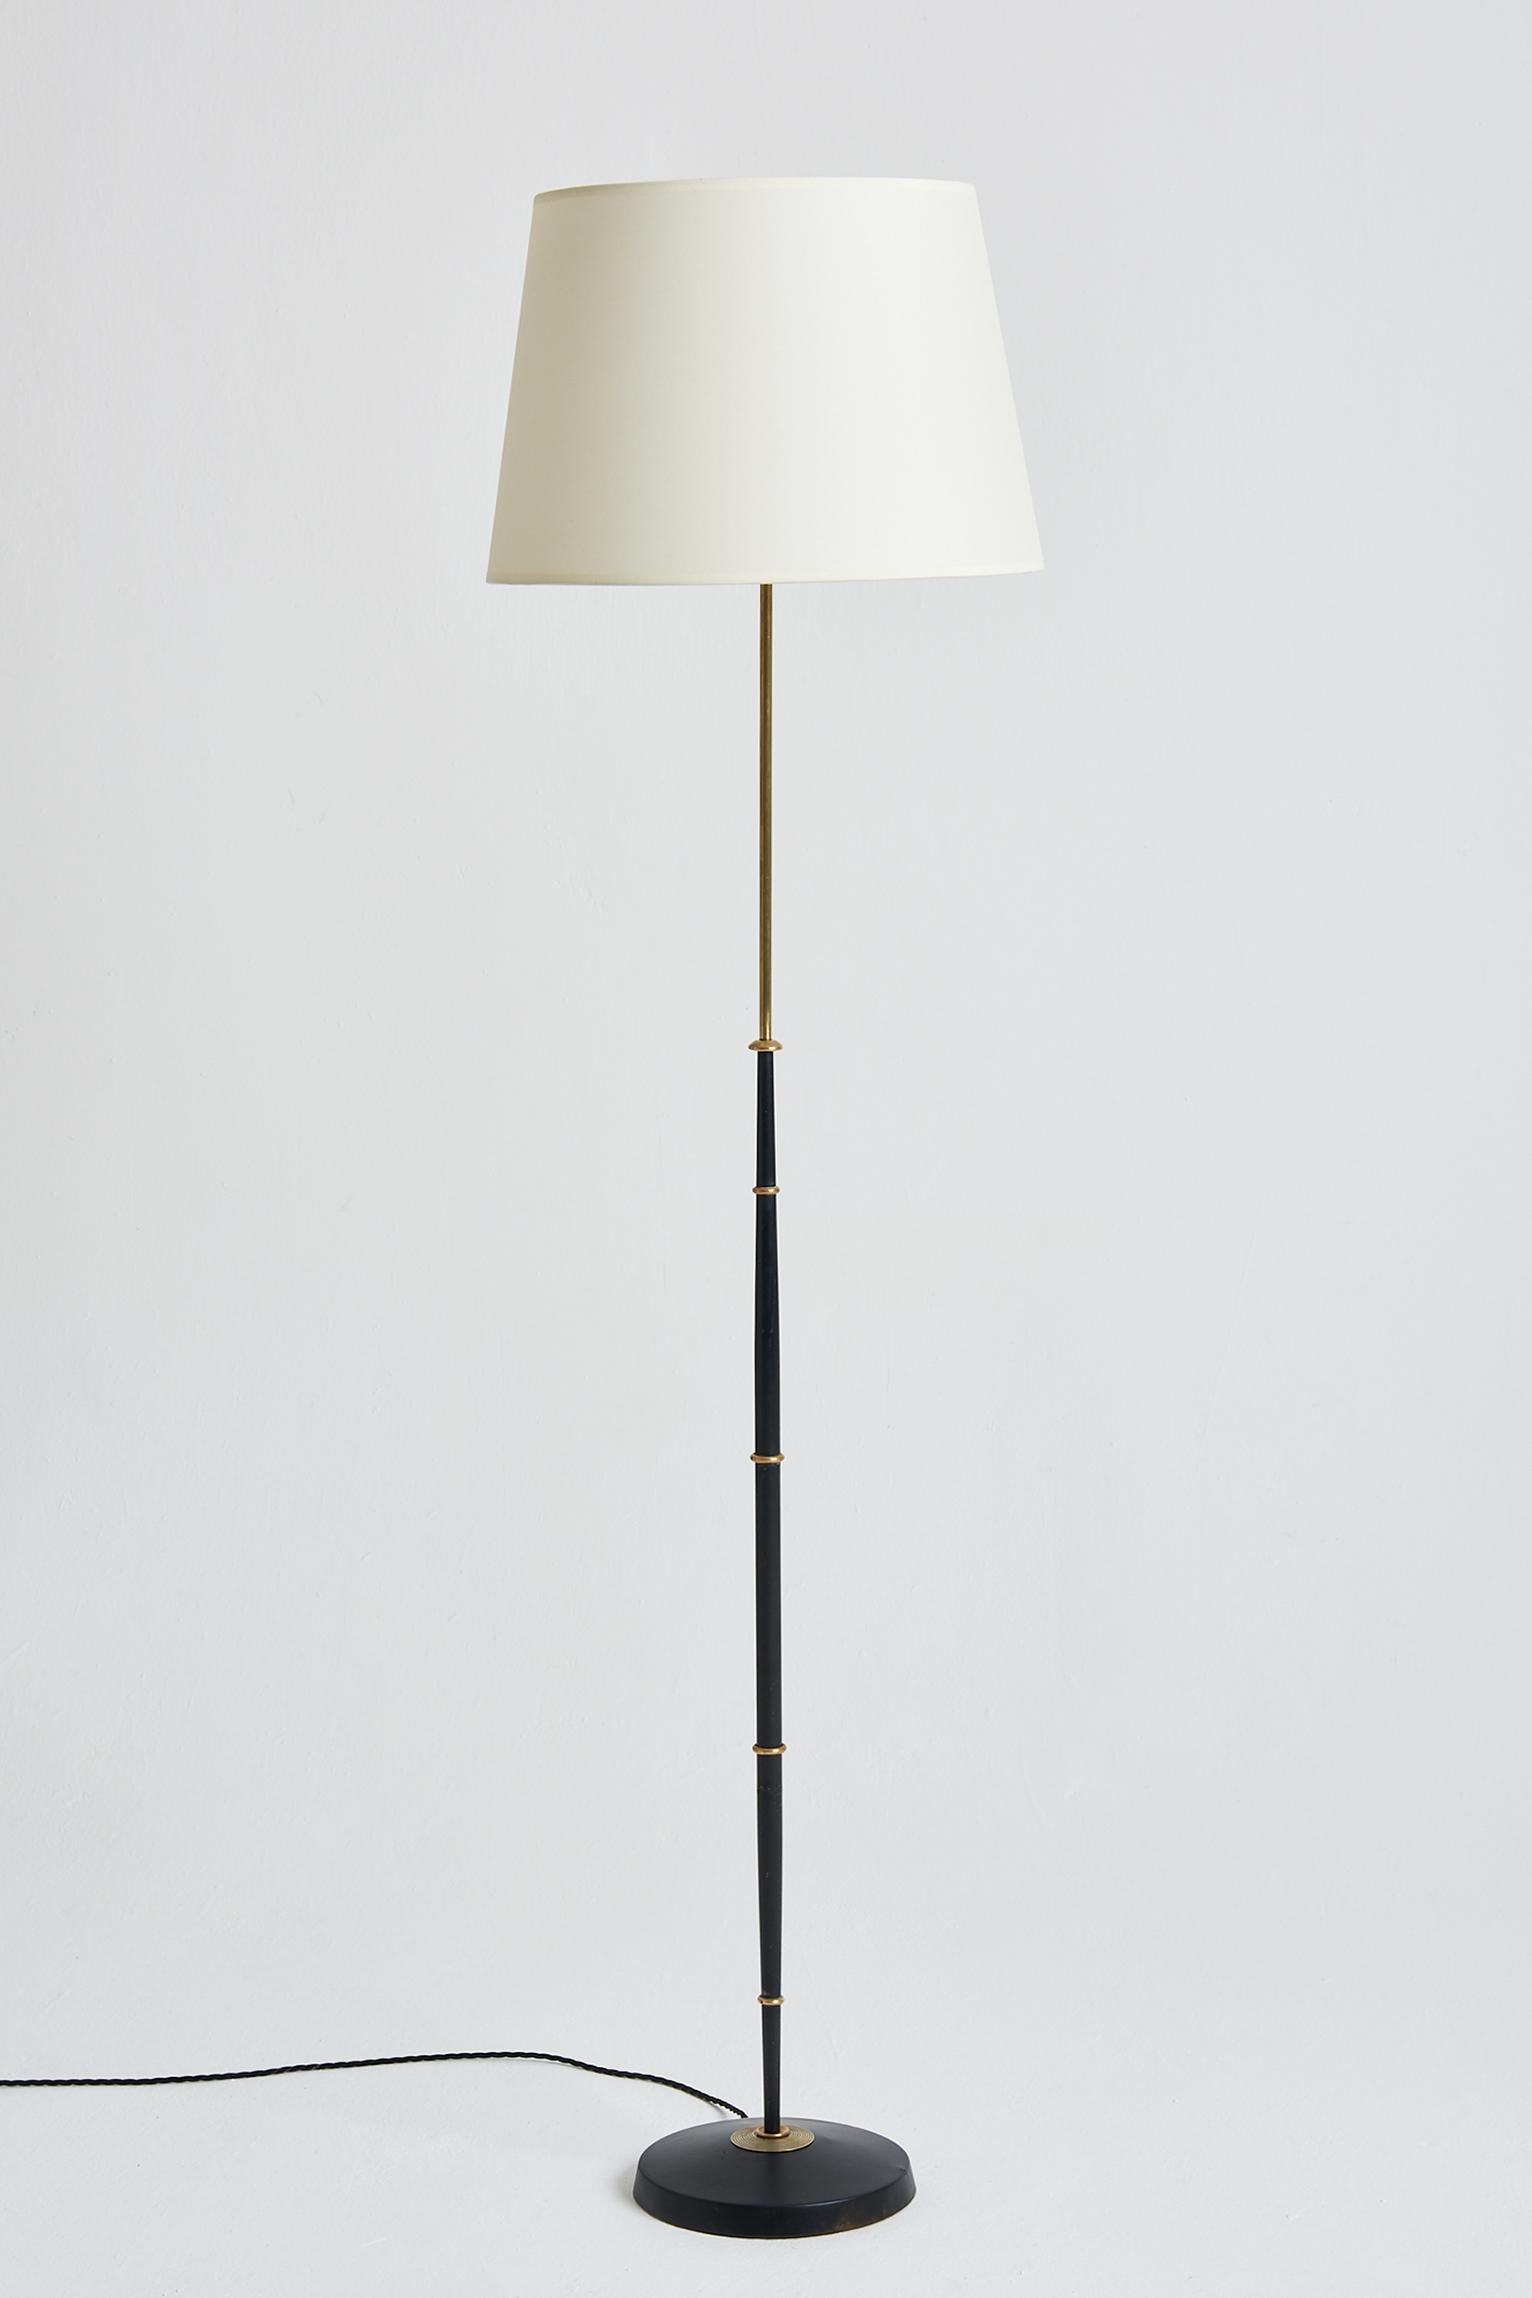 A brass and black enamelled iron floor lamp.
France, third quarter of the 20th Century. 
With the shade: 165 cm high by 41 cm diameter.
Lamp base only: 145 cm high by 25 cm diameter.